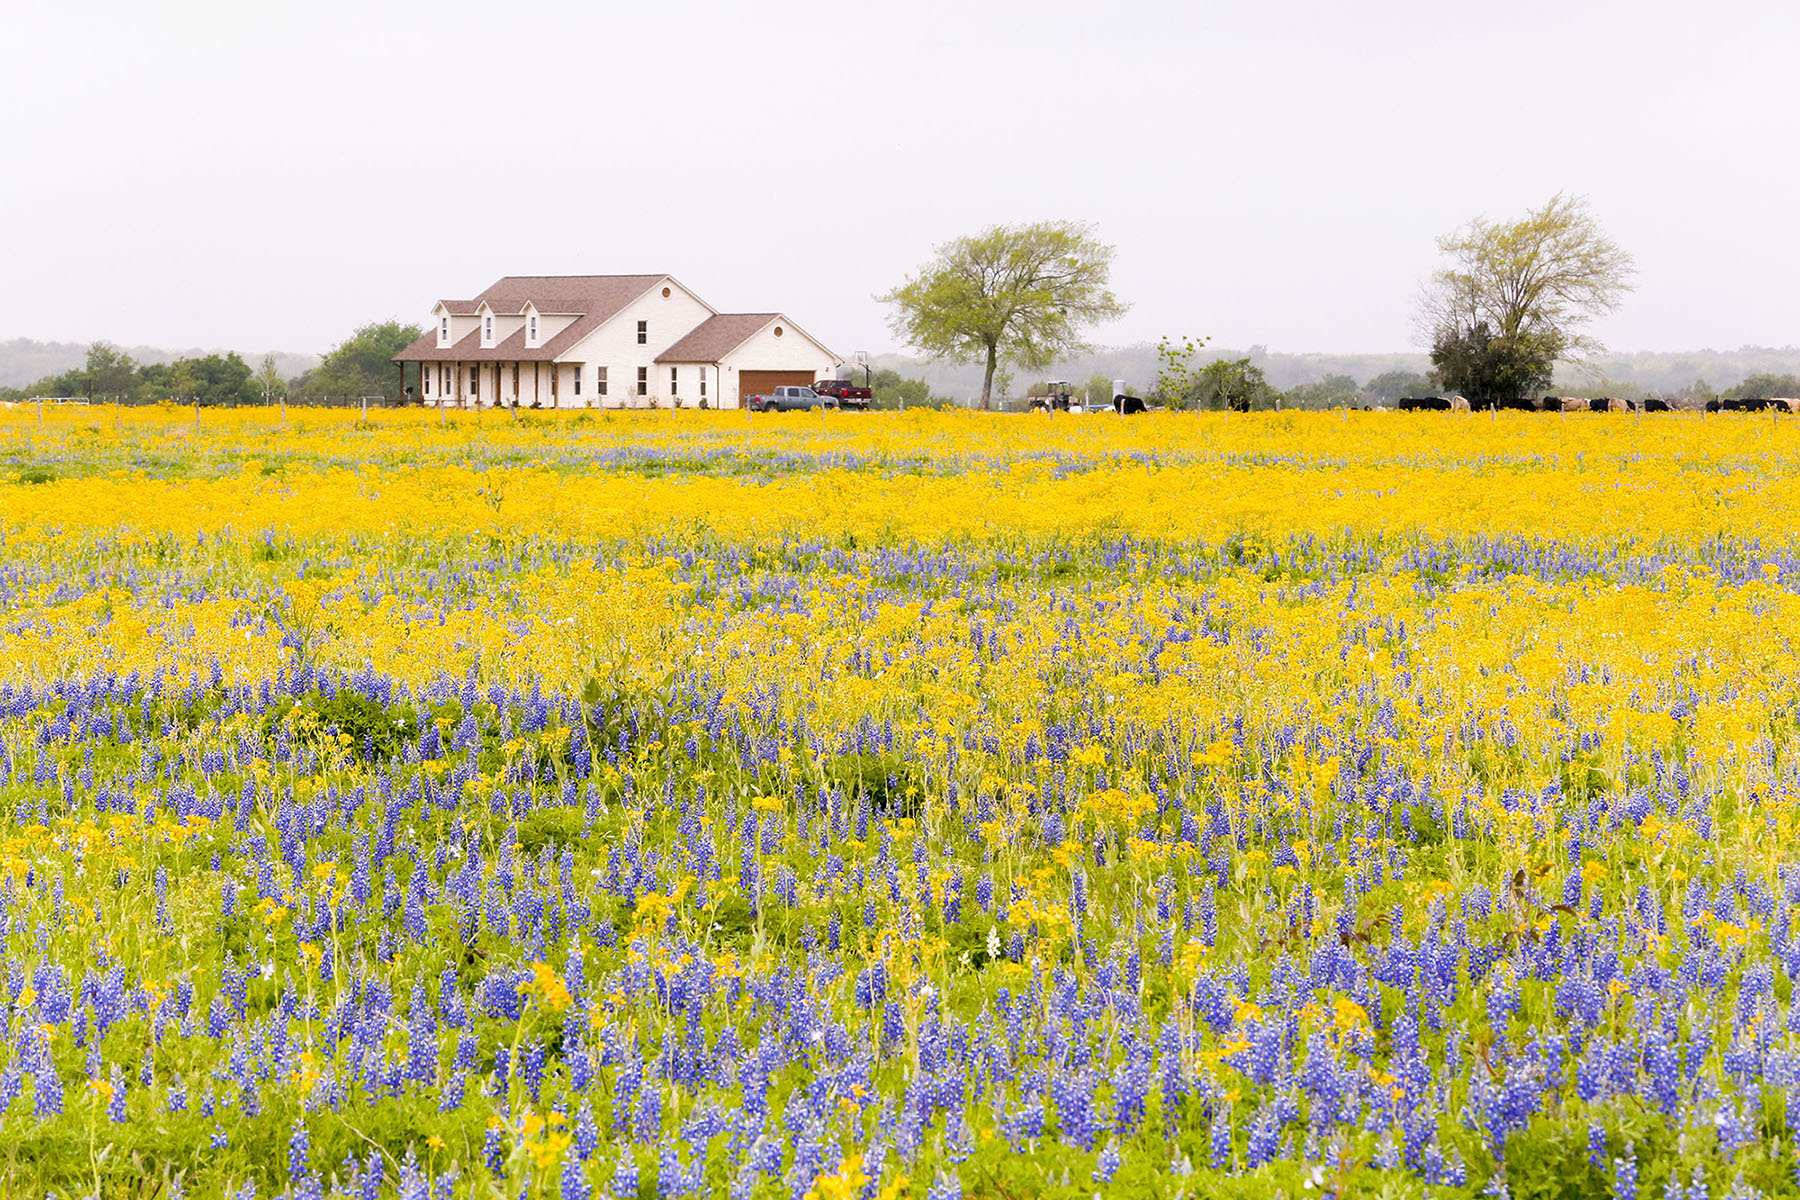 A white farmhouse behind a large open field with blue and yellow wildflowers